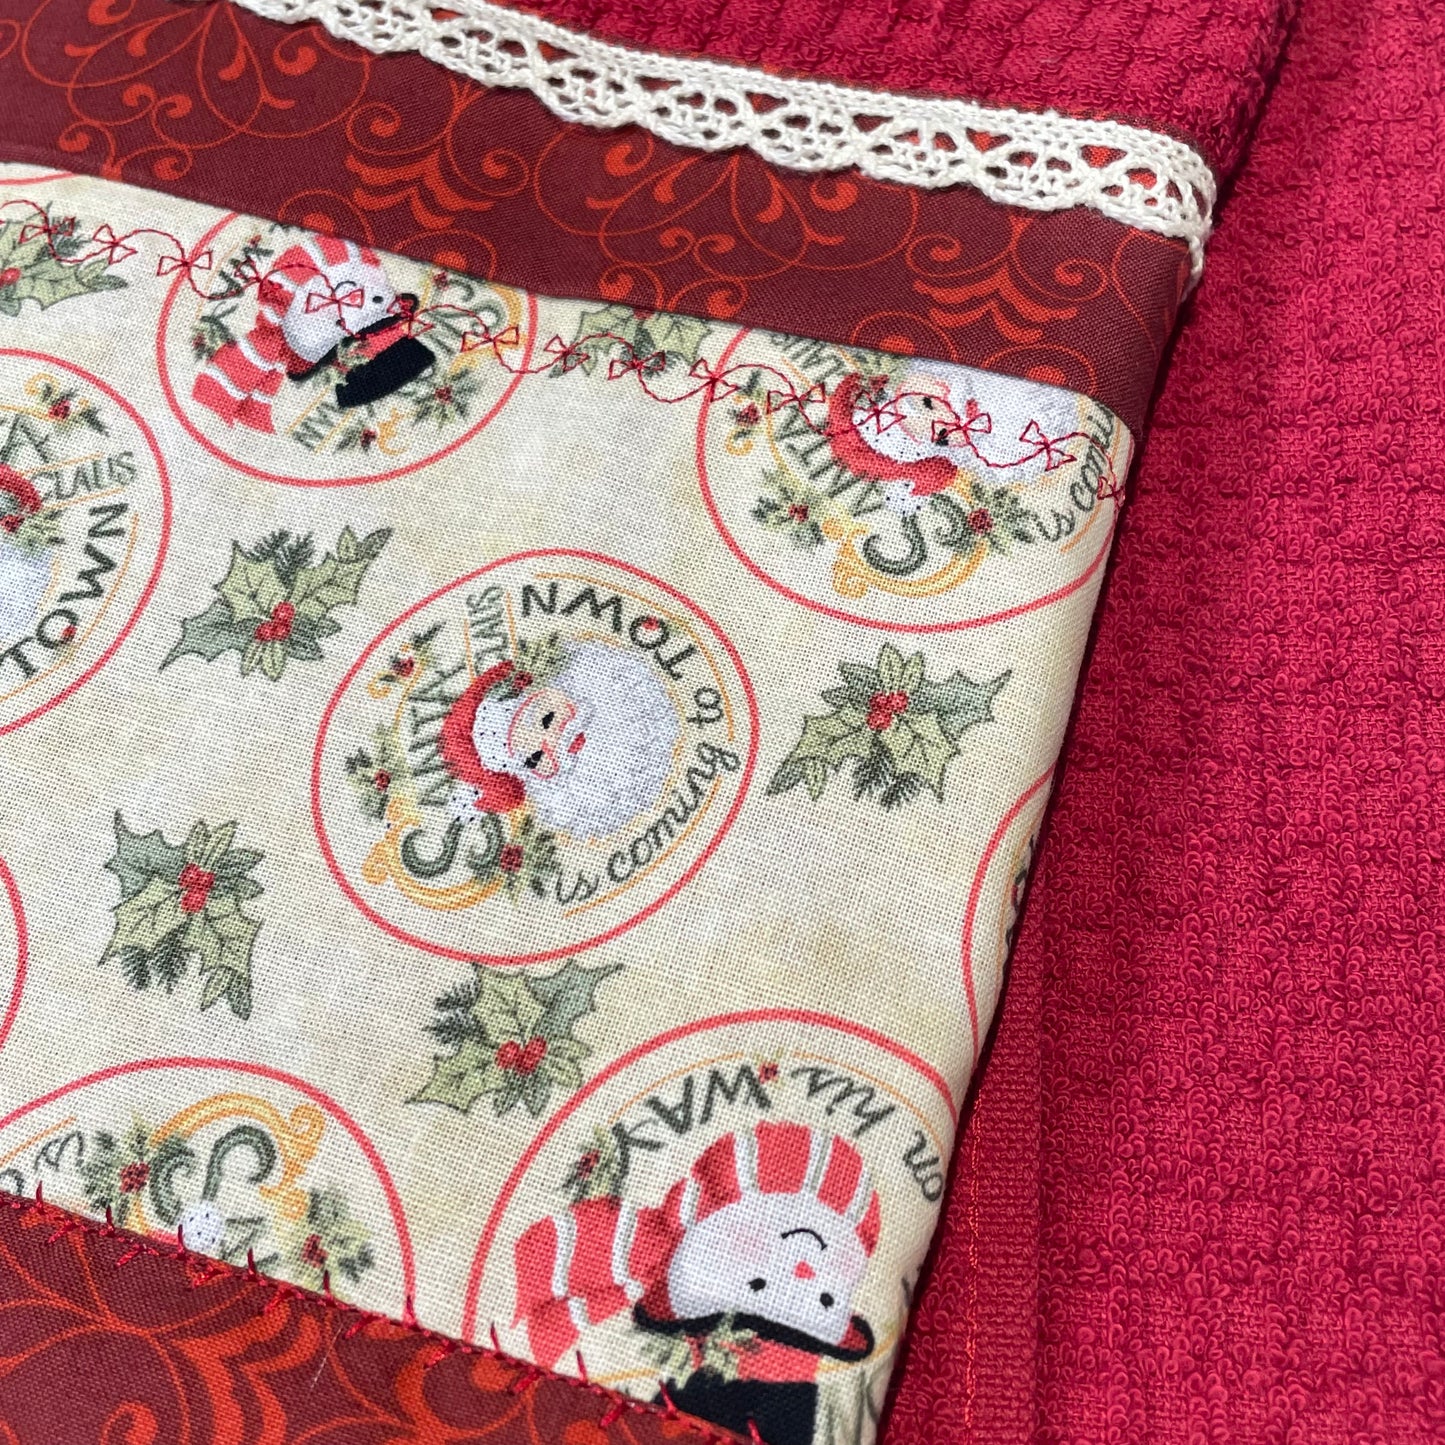 Retro Santas and Snowmen adorn this red Christmas Tea Towel. Handcrafted in Canada. Part of a mix and match collection of home decor. Shop the look at Home Stitchery Decor.